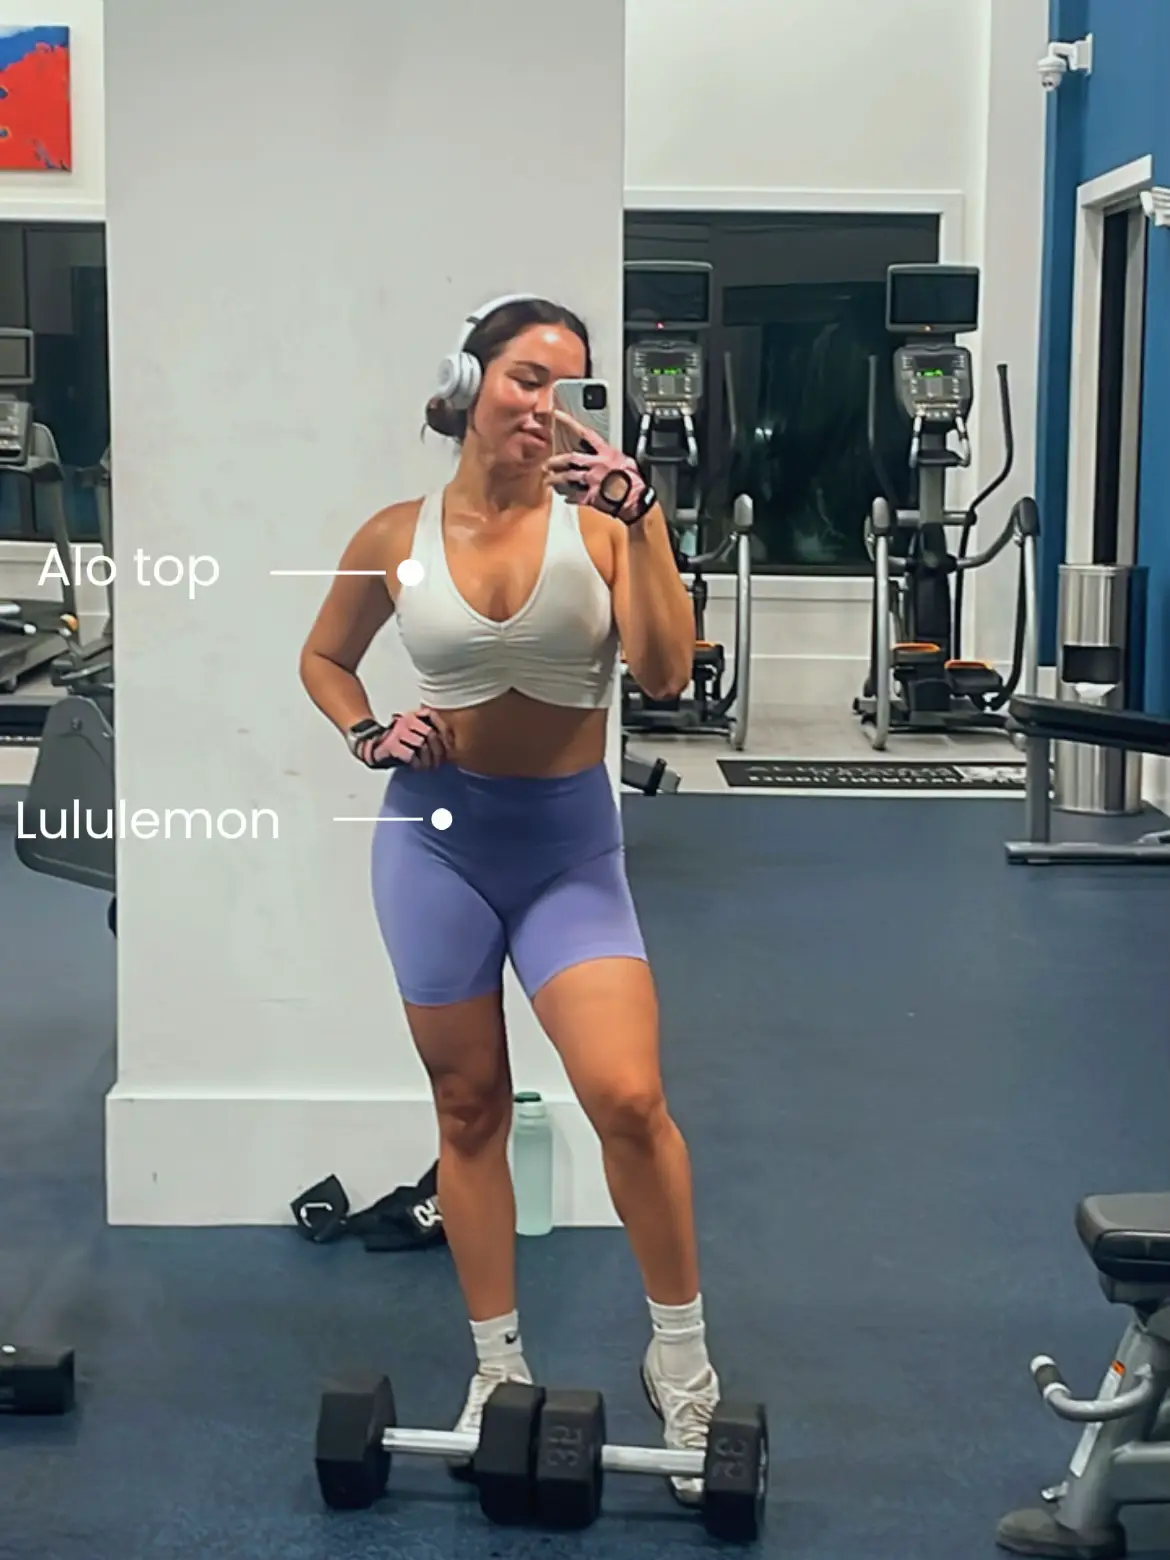 Gym Outfits I've been wearing lately 🥰✨🍋, Gallery posted by Blanca  Alicia